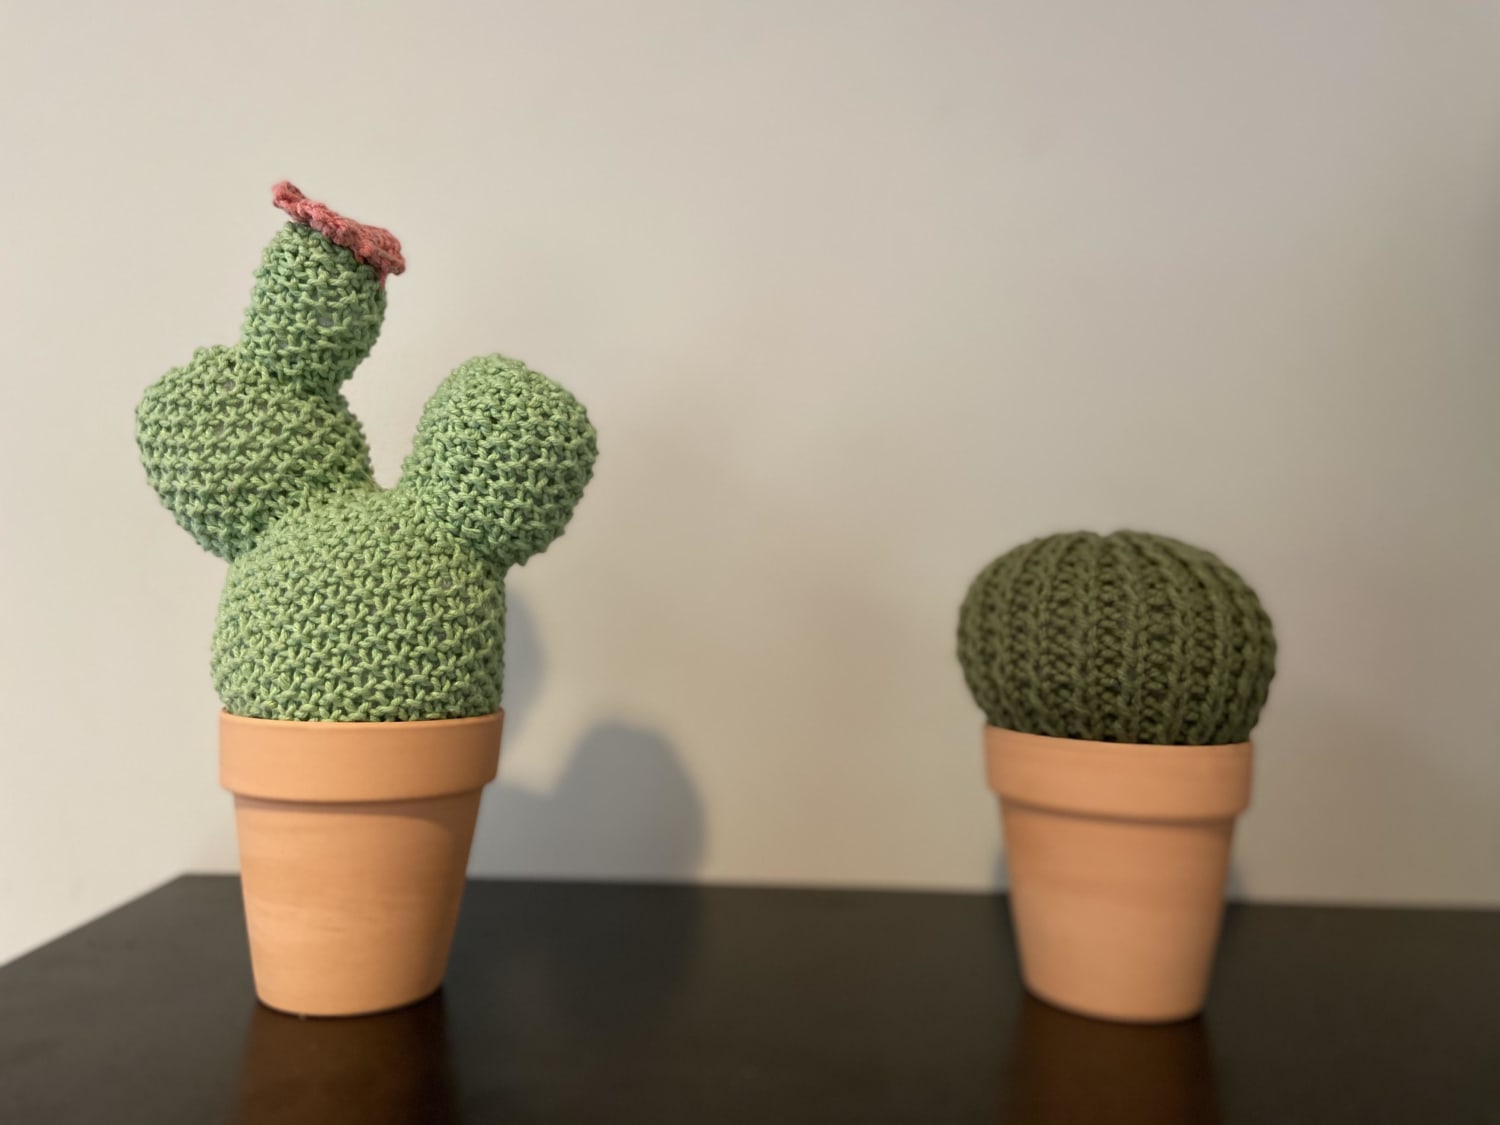 I knitted cacti and I’m obsessed! Goes quite nicely with my new house plant obsession 😊